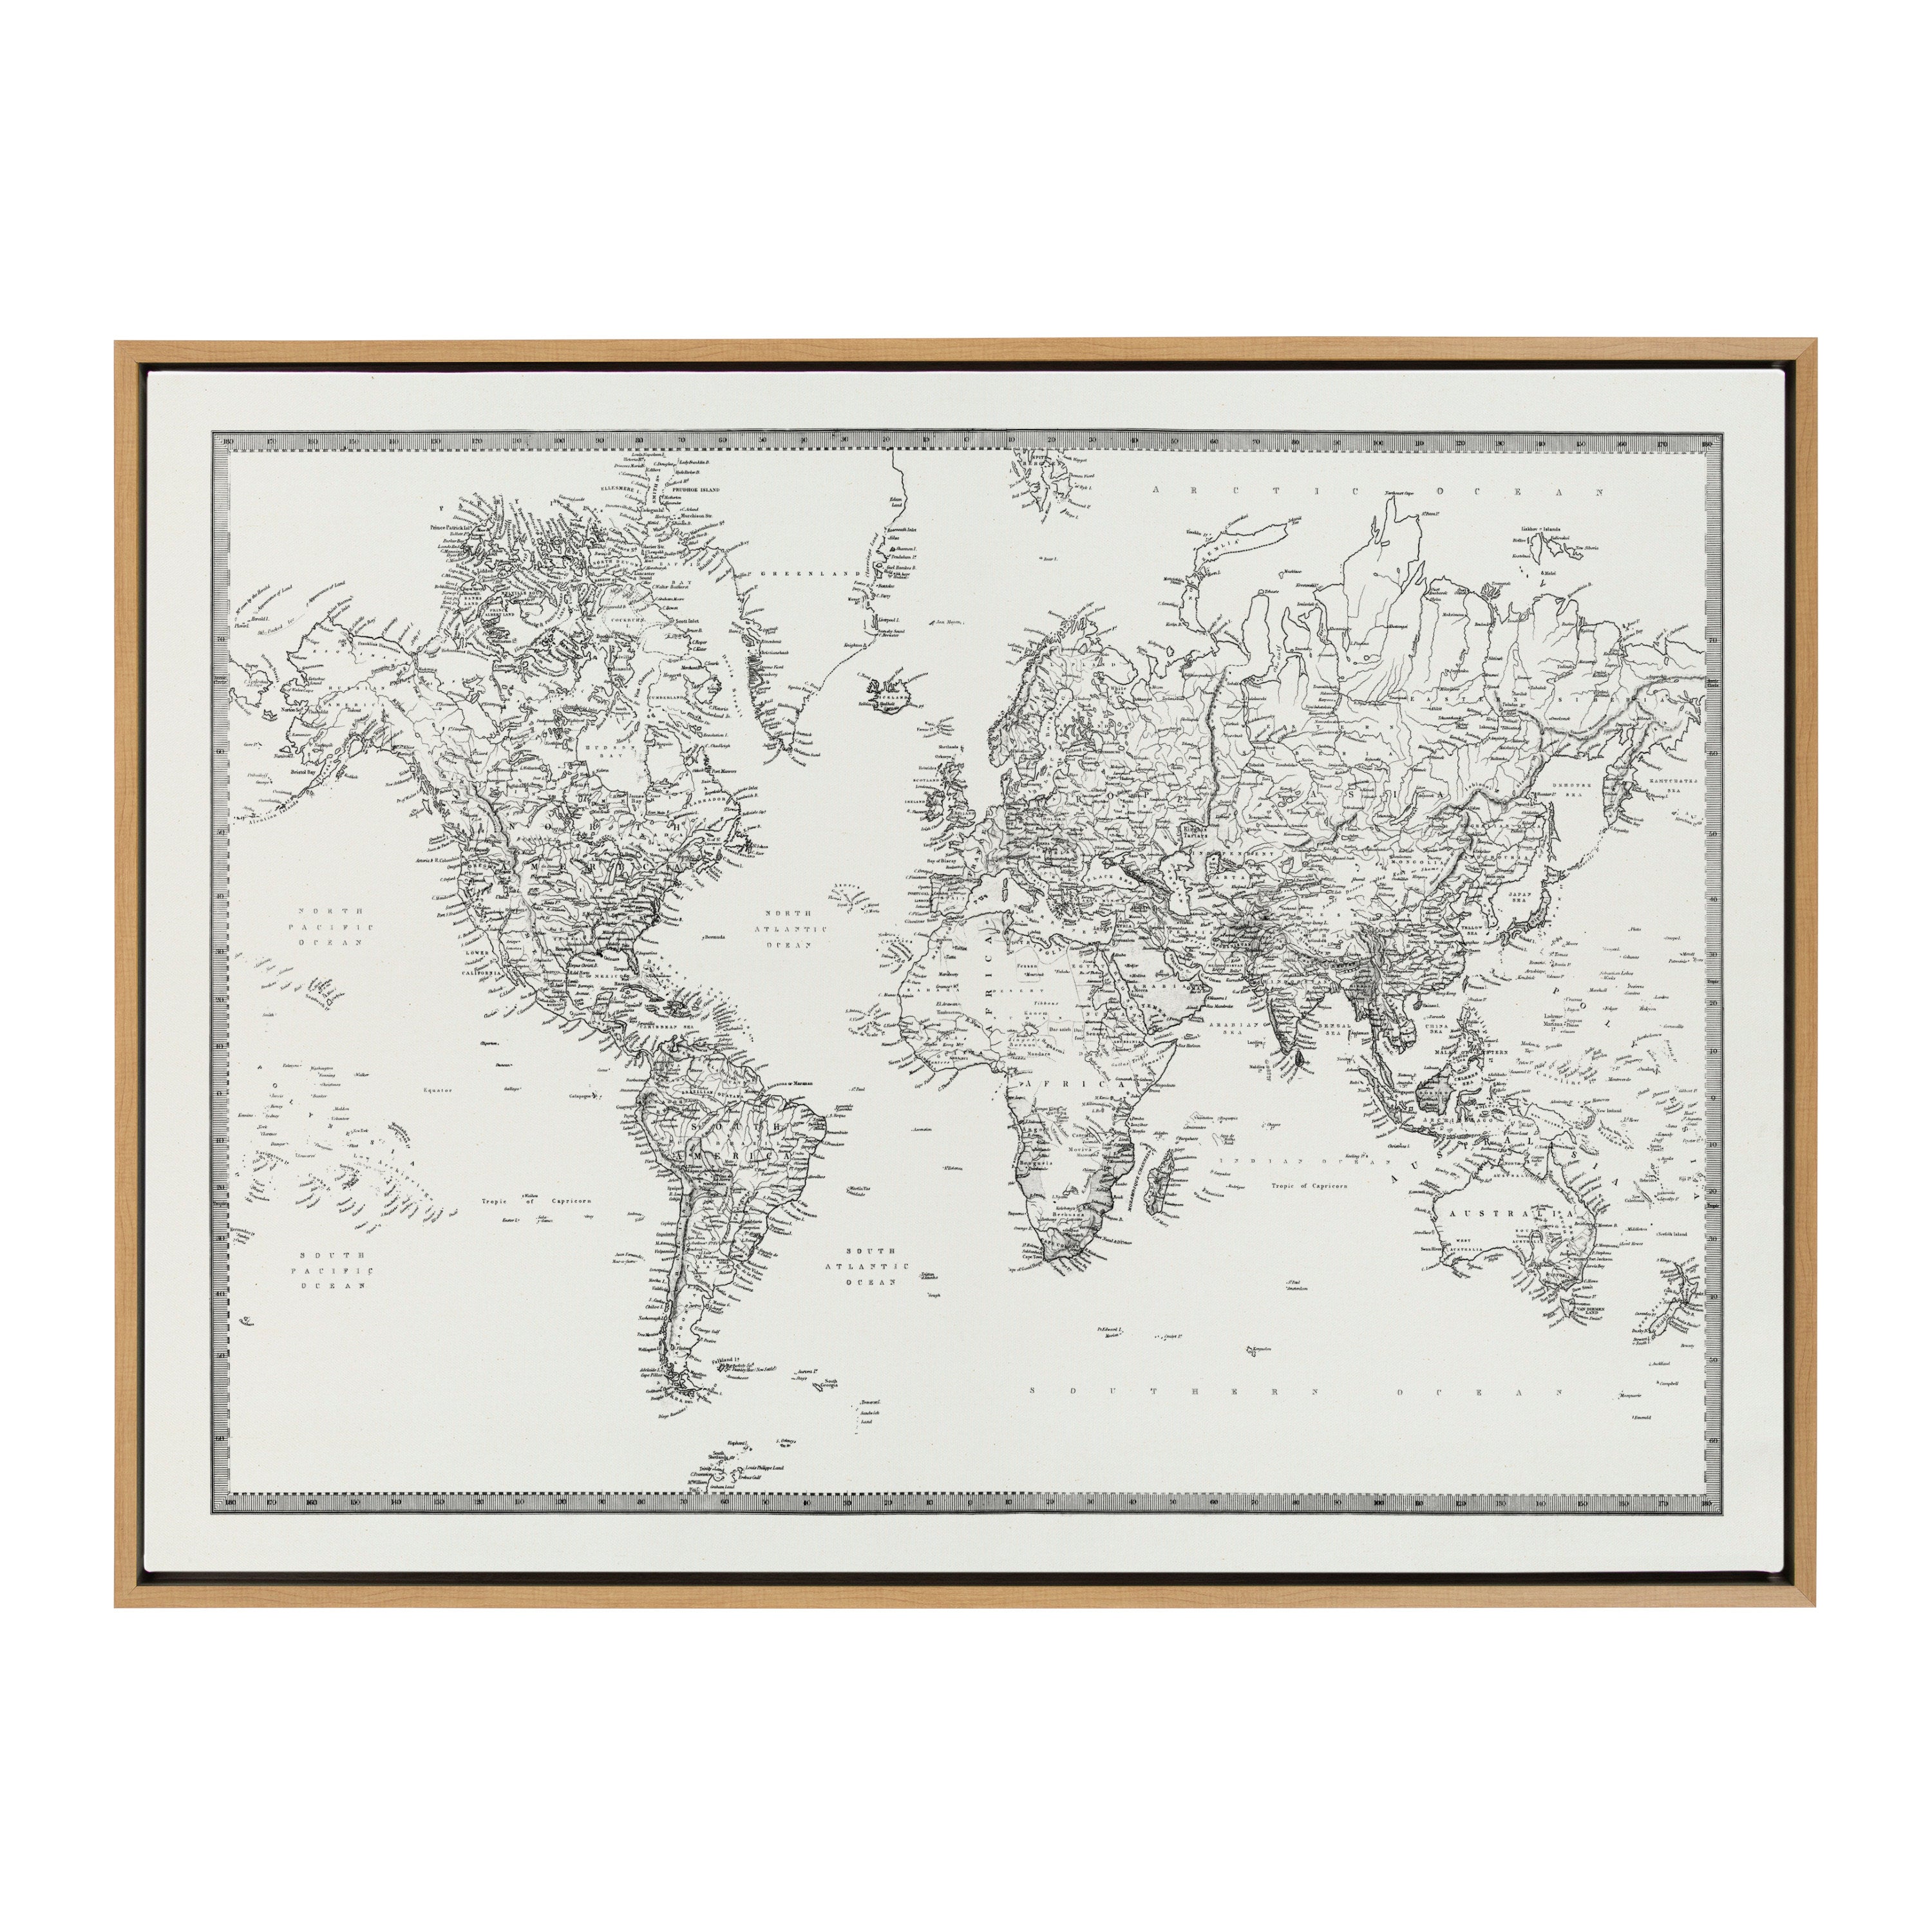 Sylvie Vintage Black and White World Map Framed Canvas by The Creative Bunch Studio